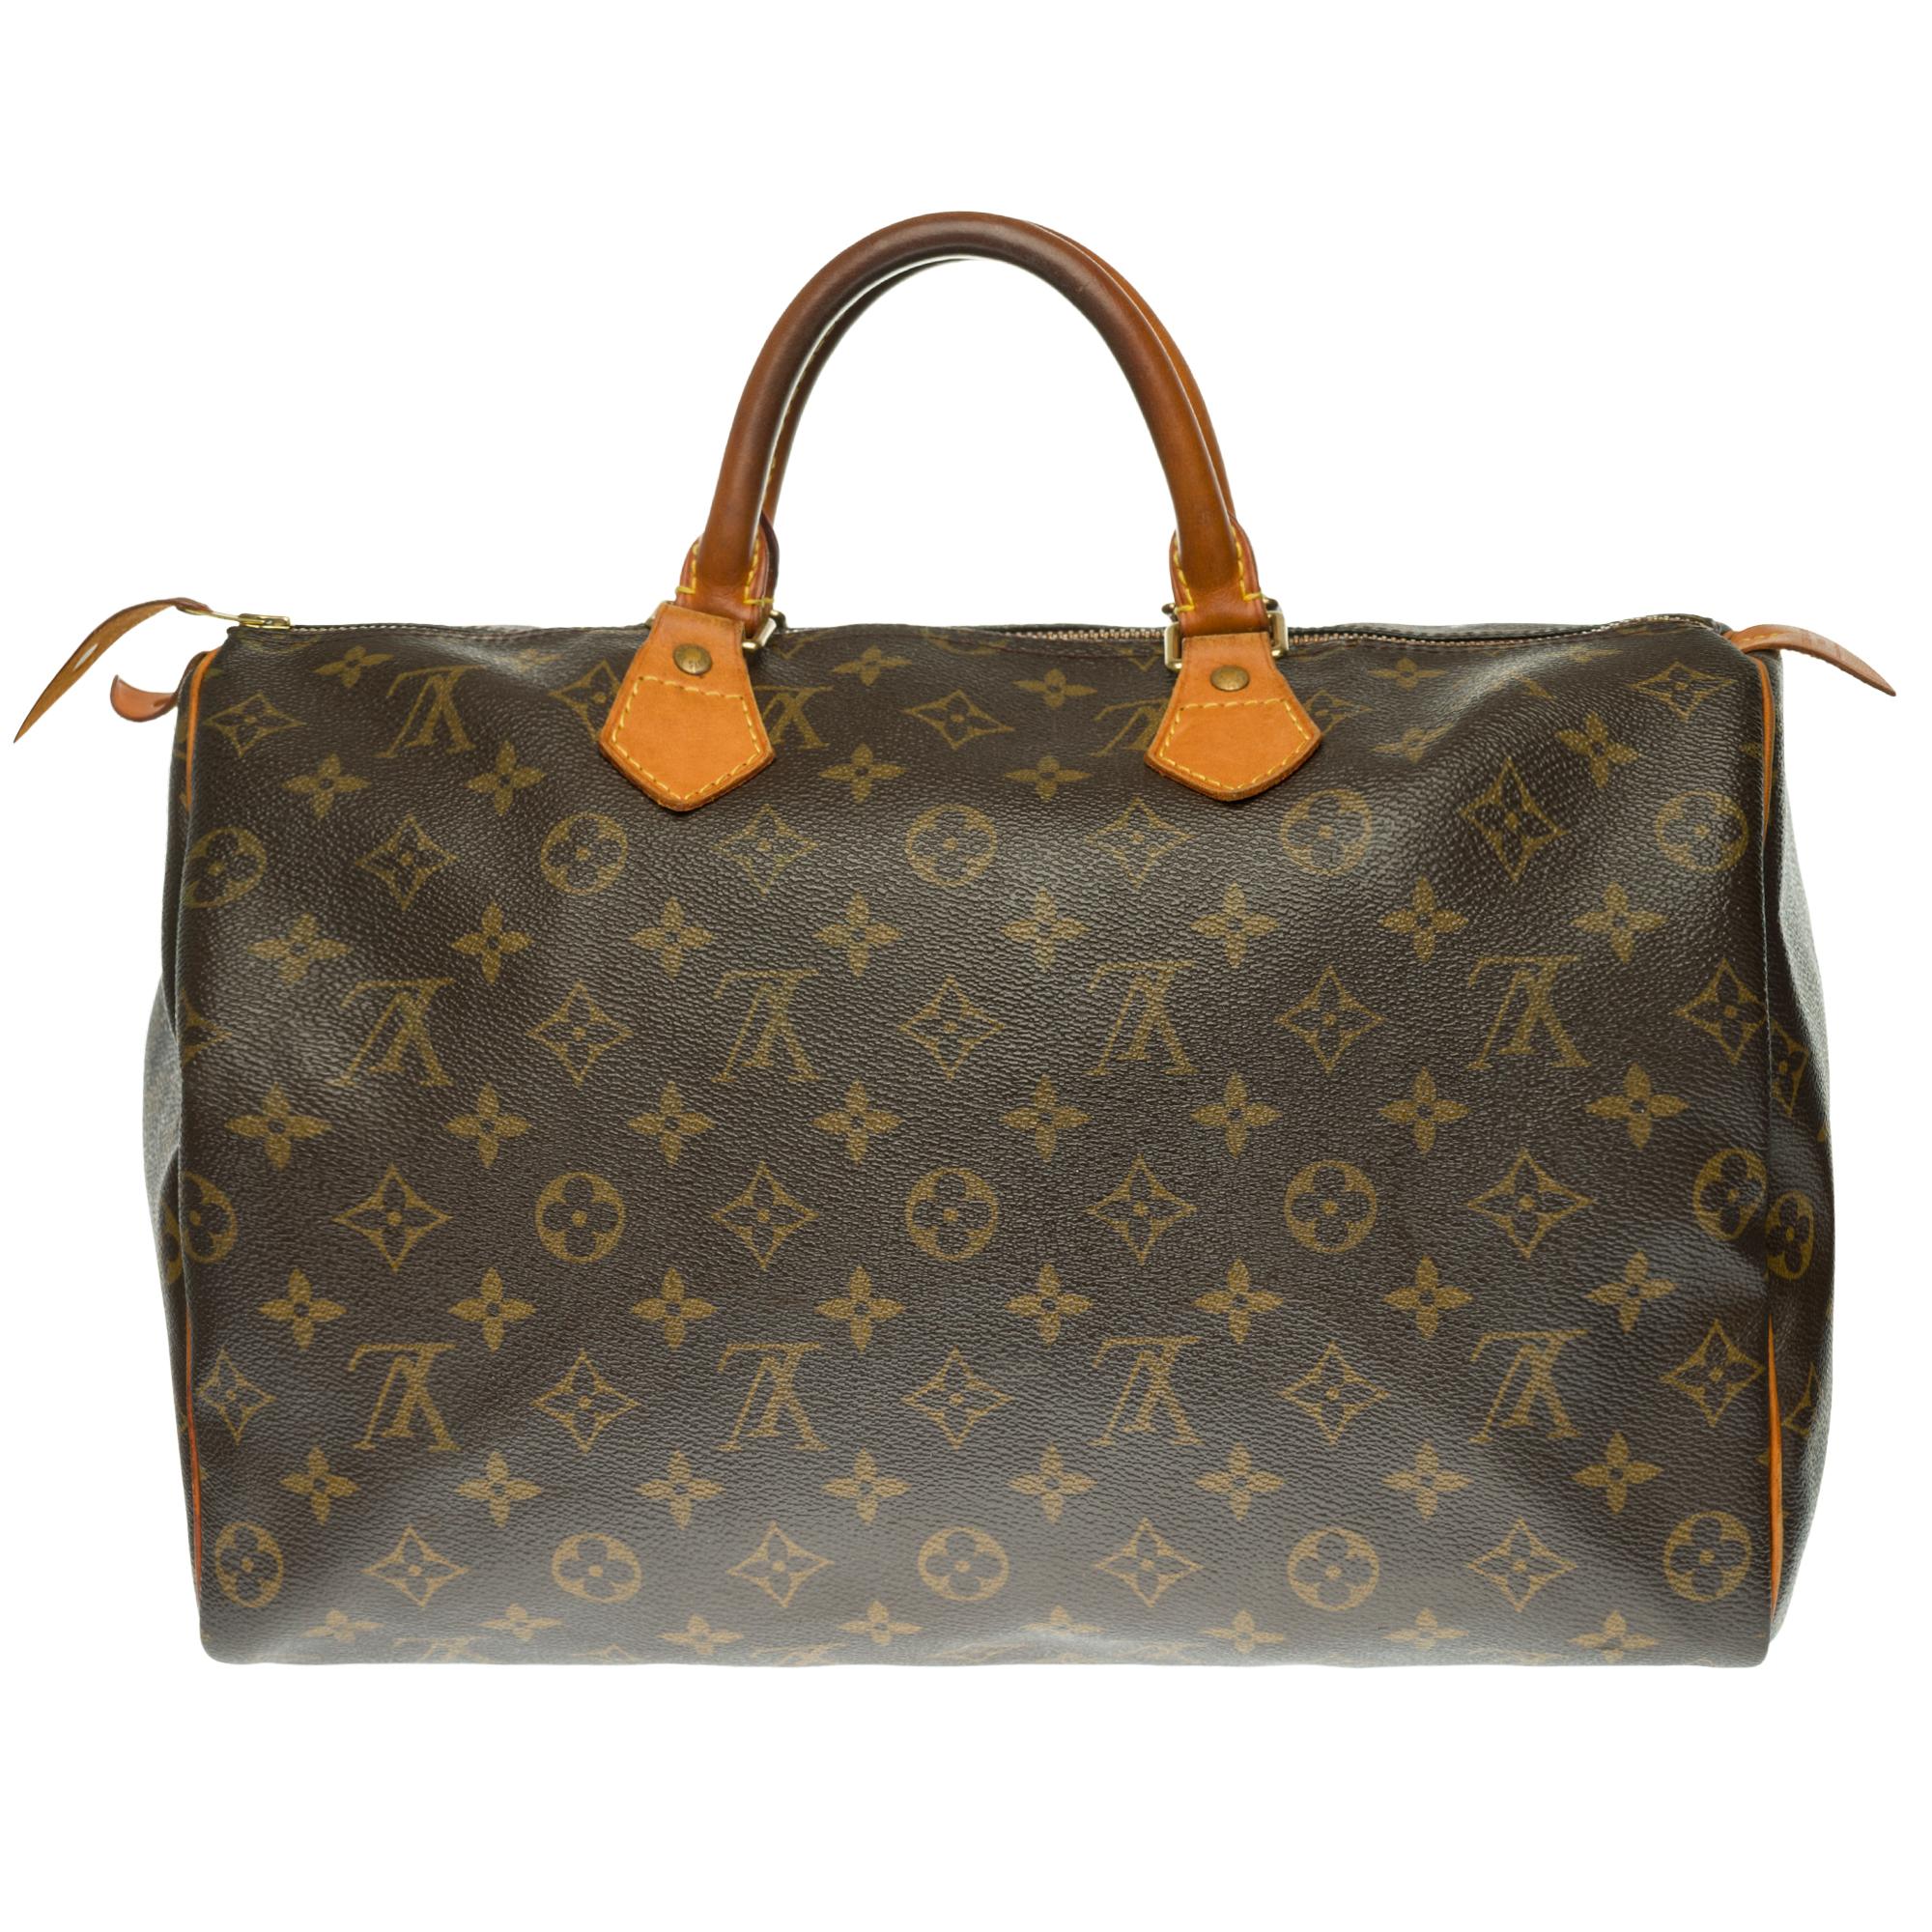 Louis Vuitton Speedy 35 handbag in customized Monogram canvas 
Gold-tone metal hardware, double leather handle for a carry. Double zip closure.
Interior in brown canvas.
Signature: 